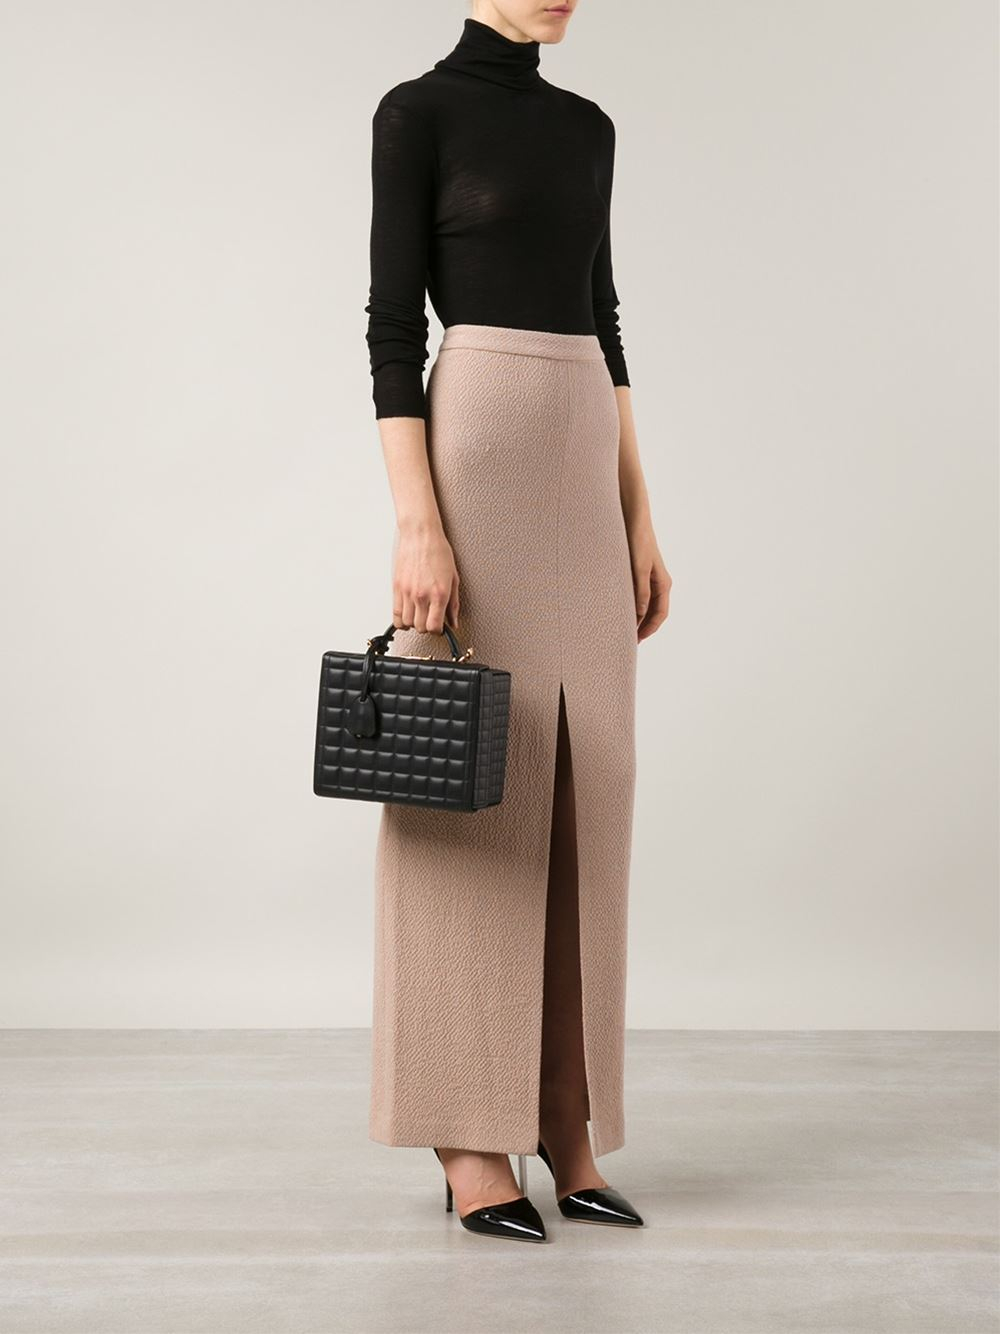 Mark cross Large 'Grace' Quilted Box Bag in Black | Lyst